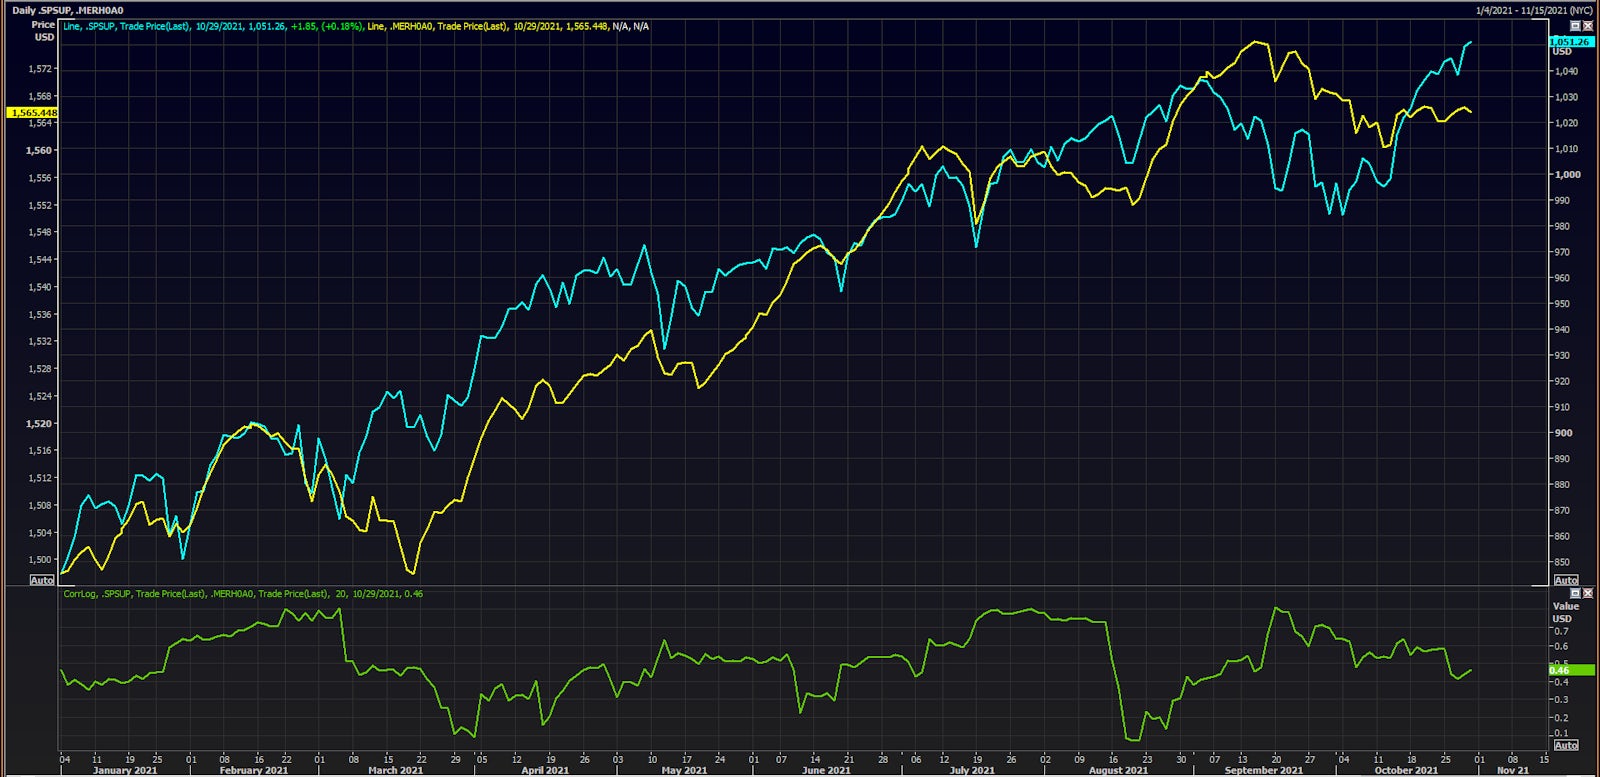 S&P 1500 Price Index & ICE BofAML US High Yield Index, With Their 20-Day Log Correlation | Source: Refinitiv